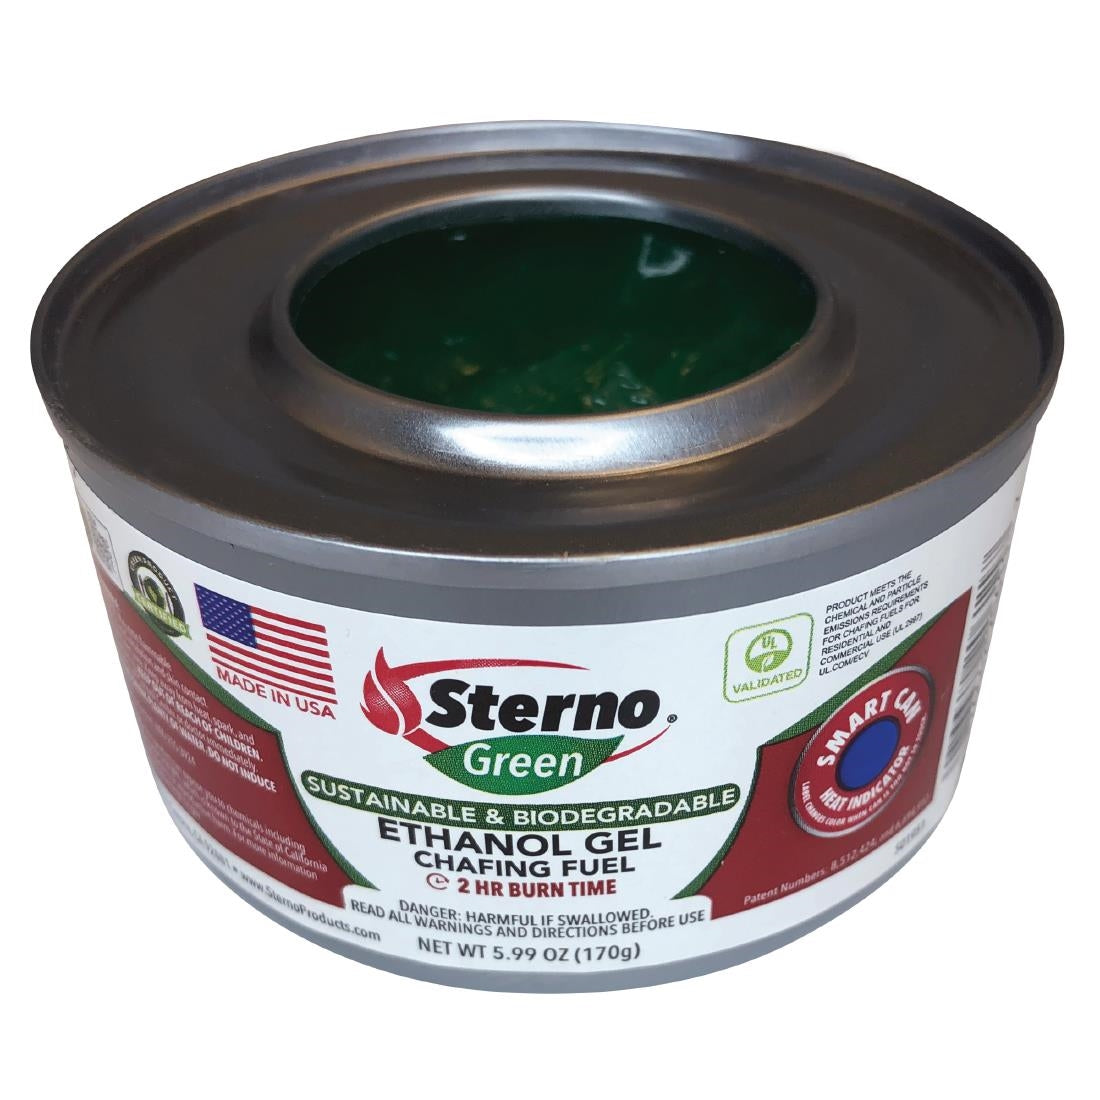 SA607 Sterno Green Ethanol Gel Chafing Fuel 2 Hour (Pack of 72)